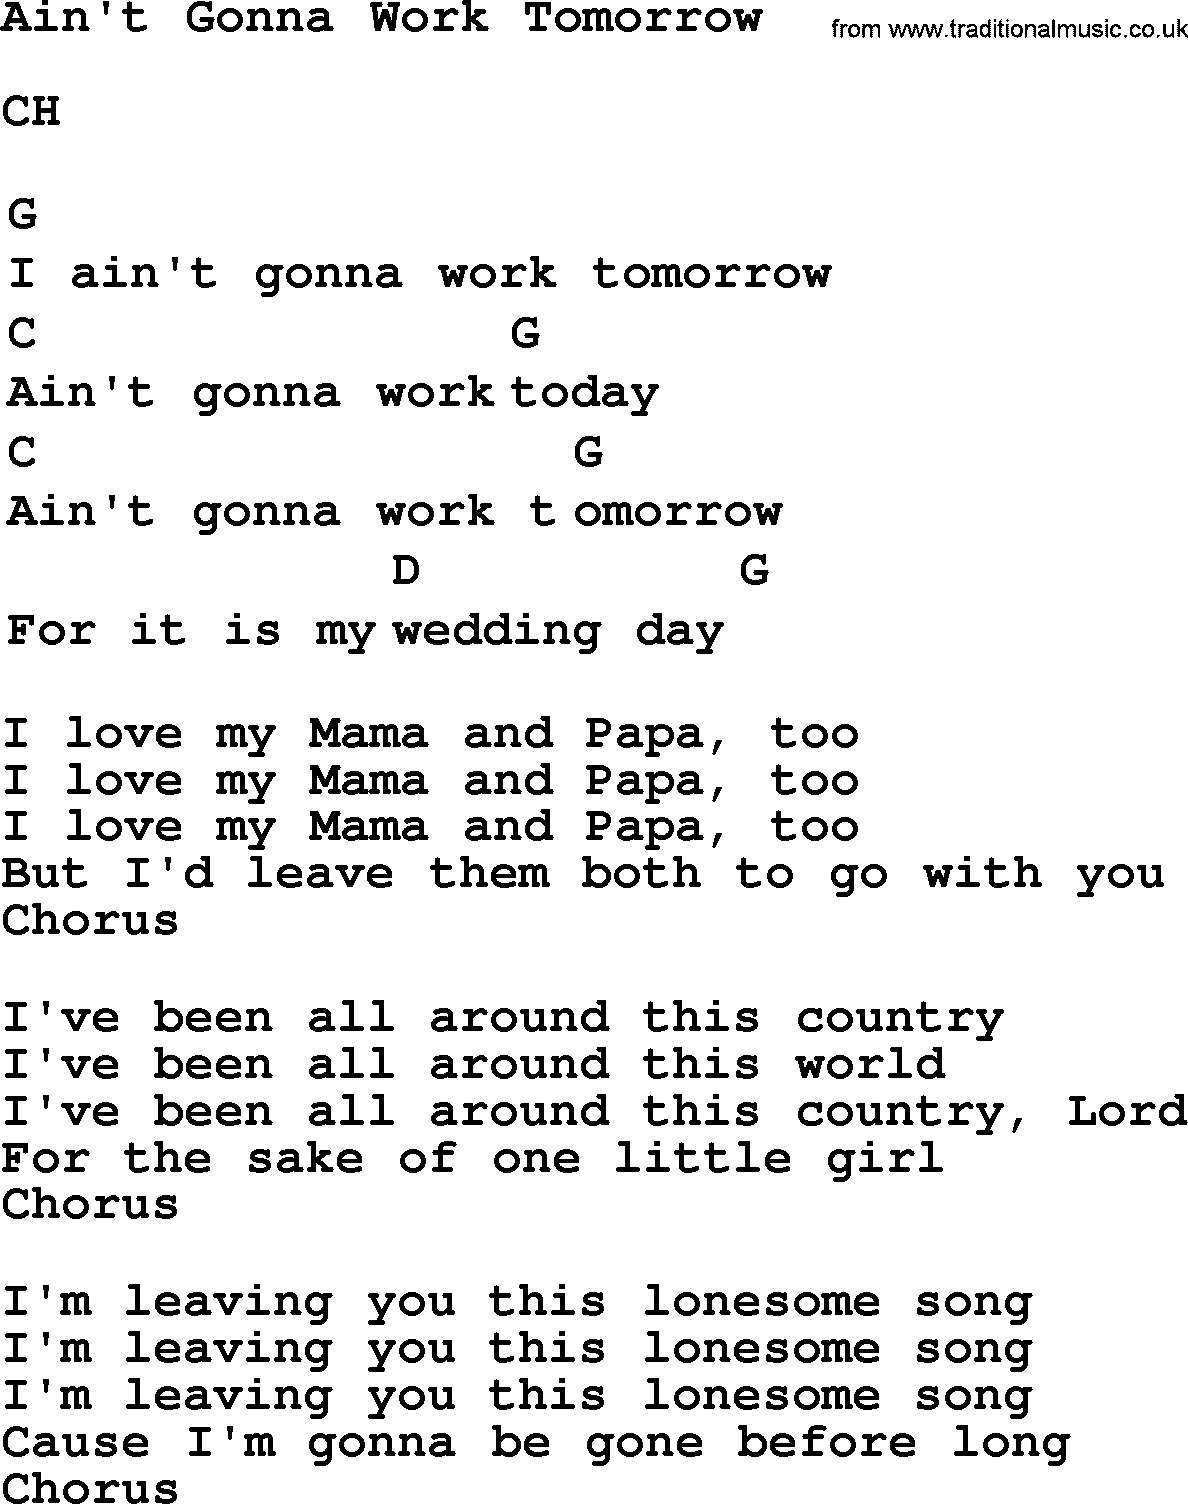 Top 1000 Most Popular Folk and Old-time Songs: Aint Gonna Work Tomorrow, lyrics and chords